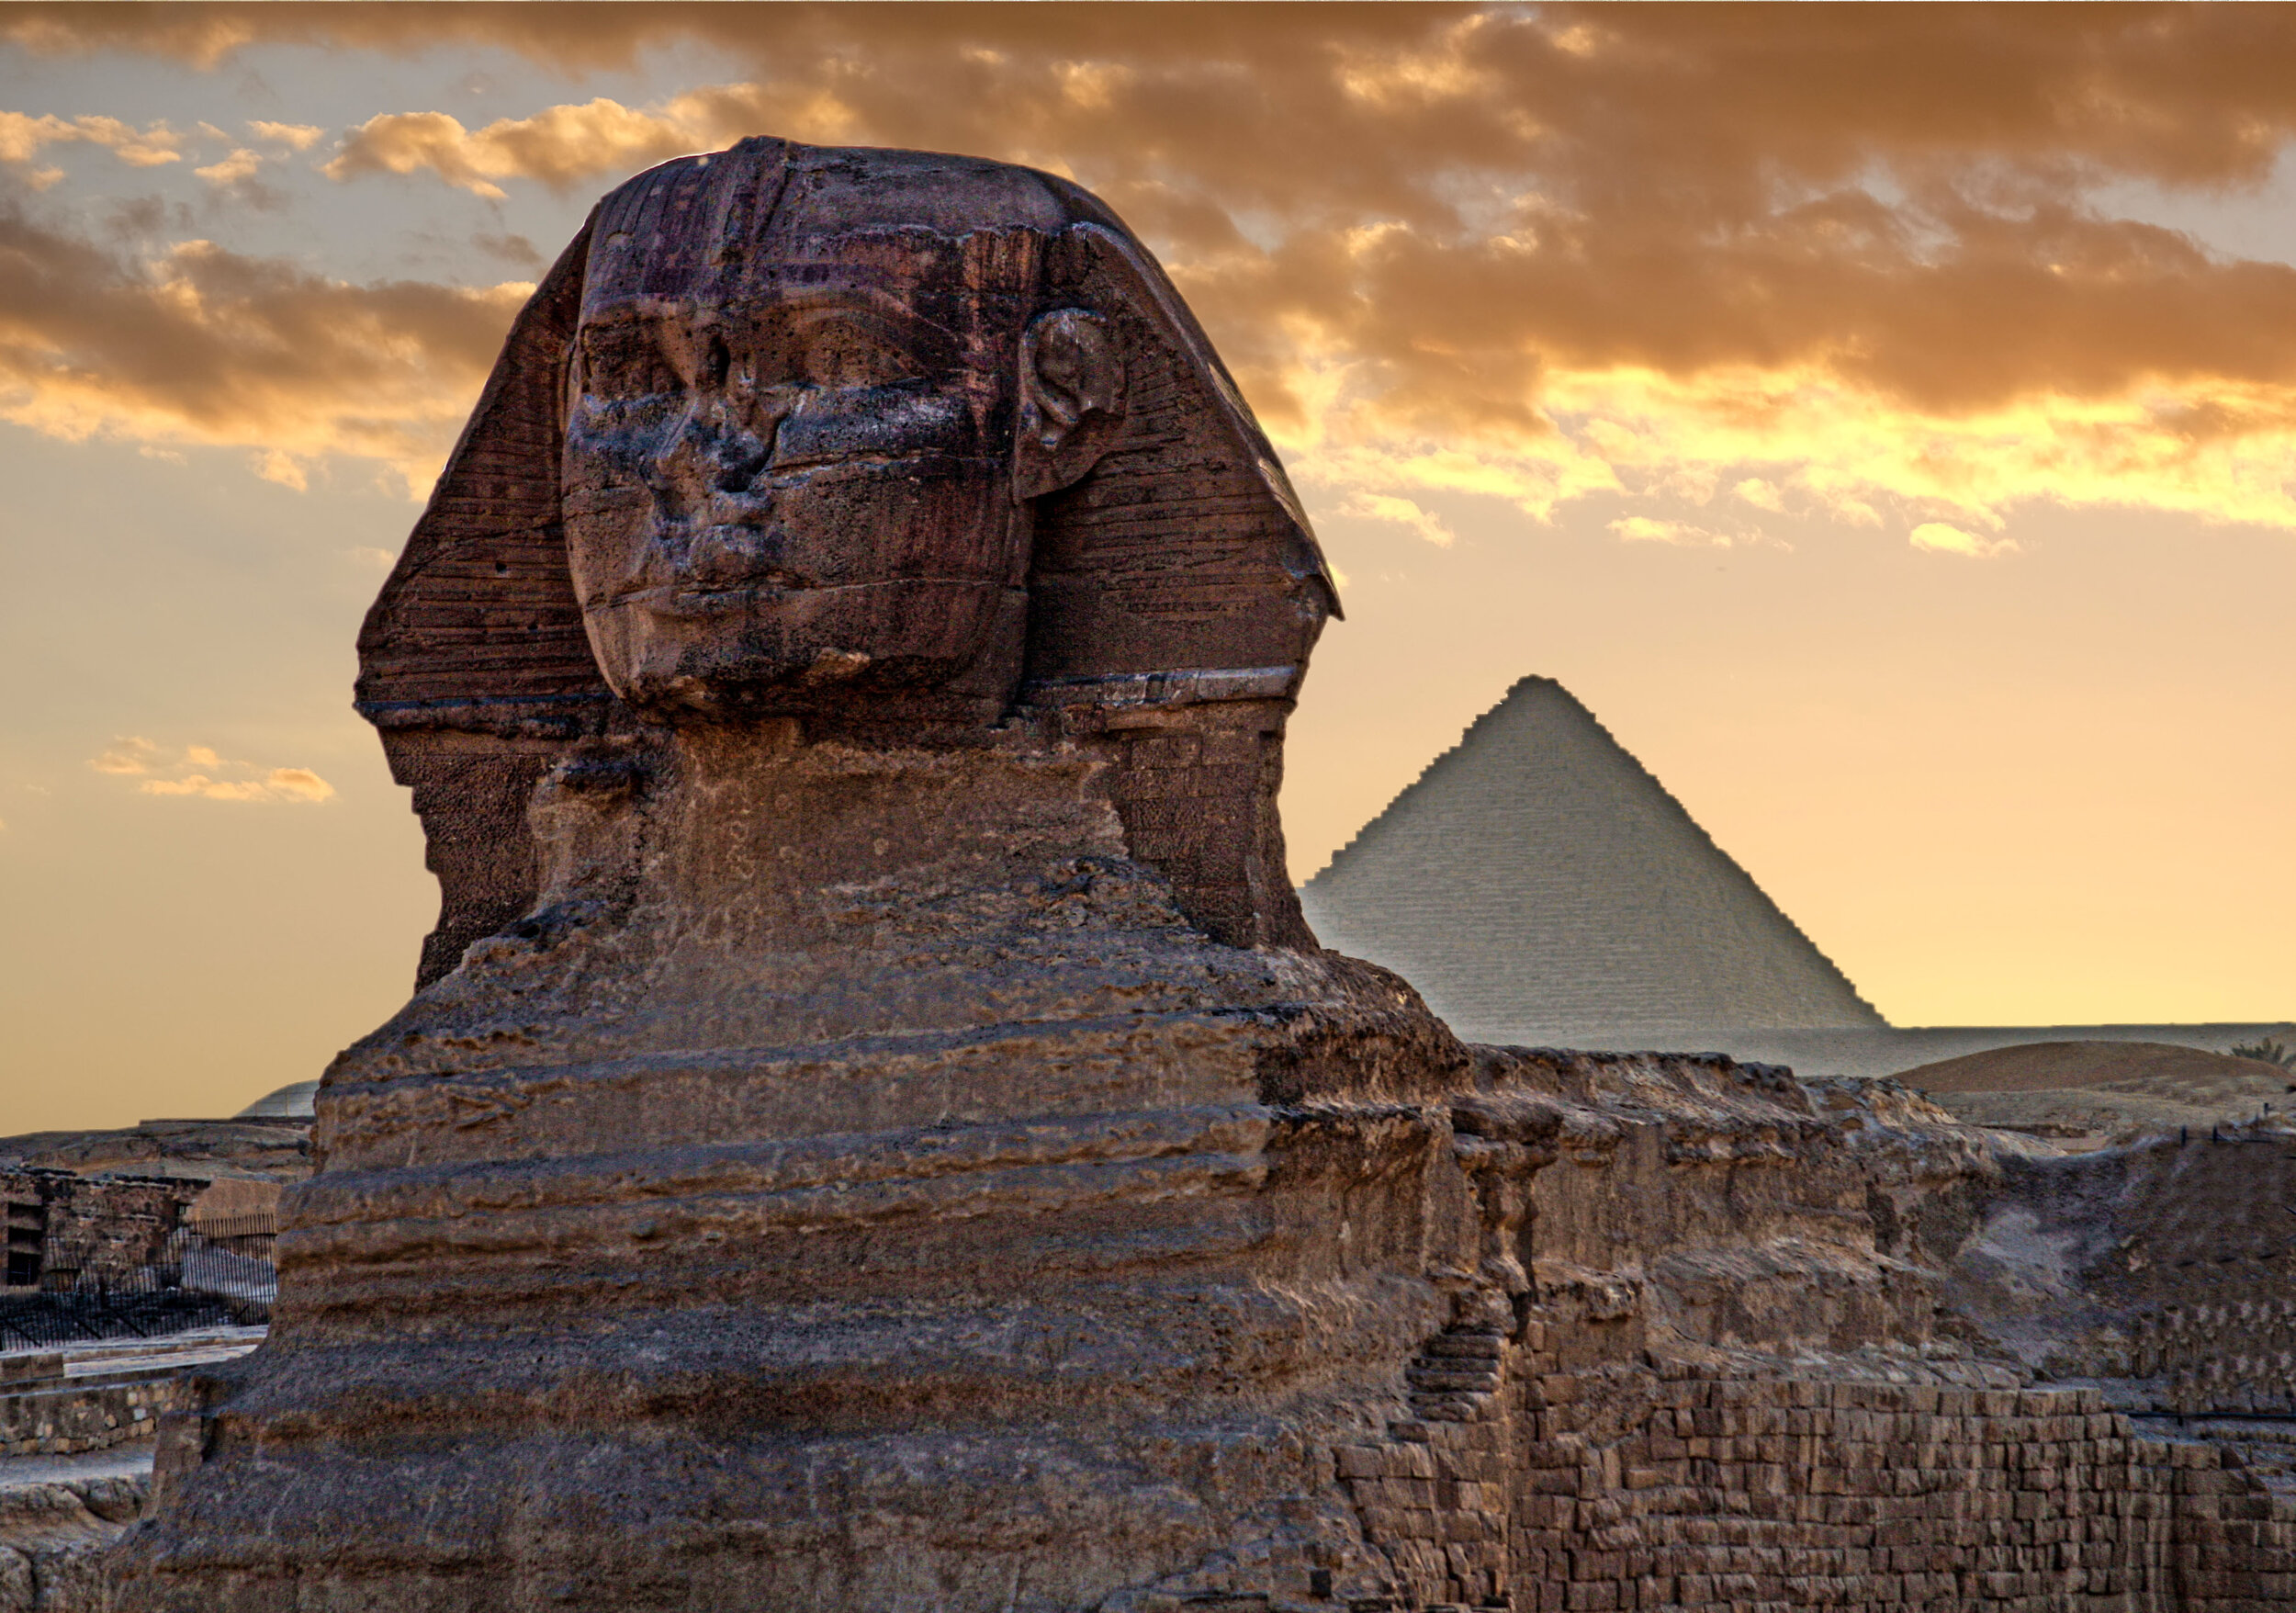  The Sphinx and Pyramid,Giza, Egypt         